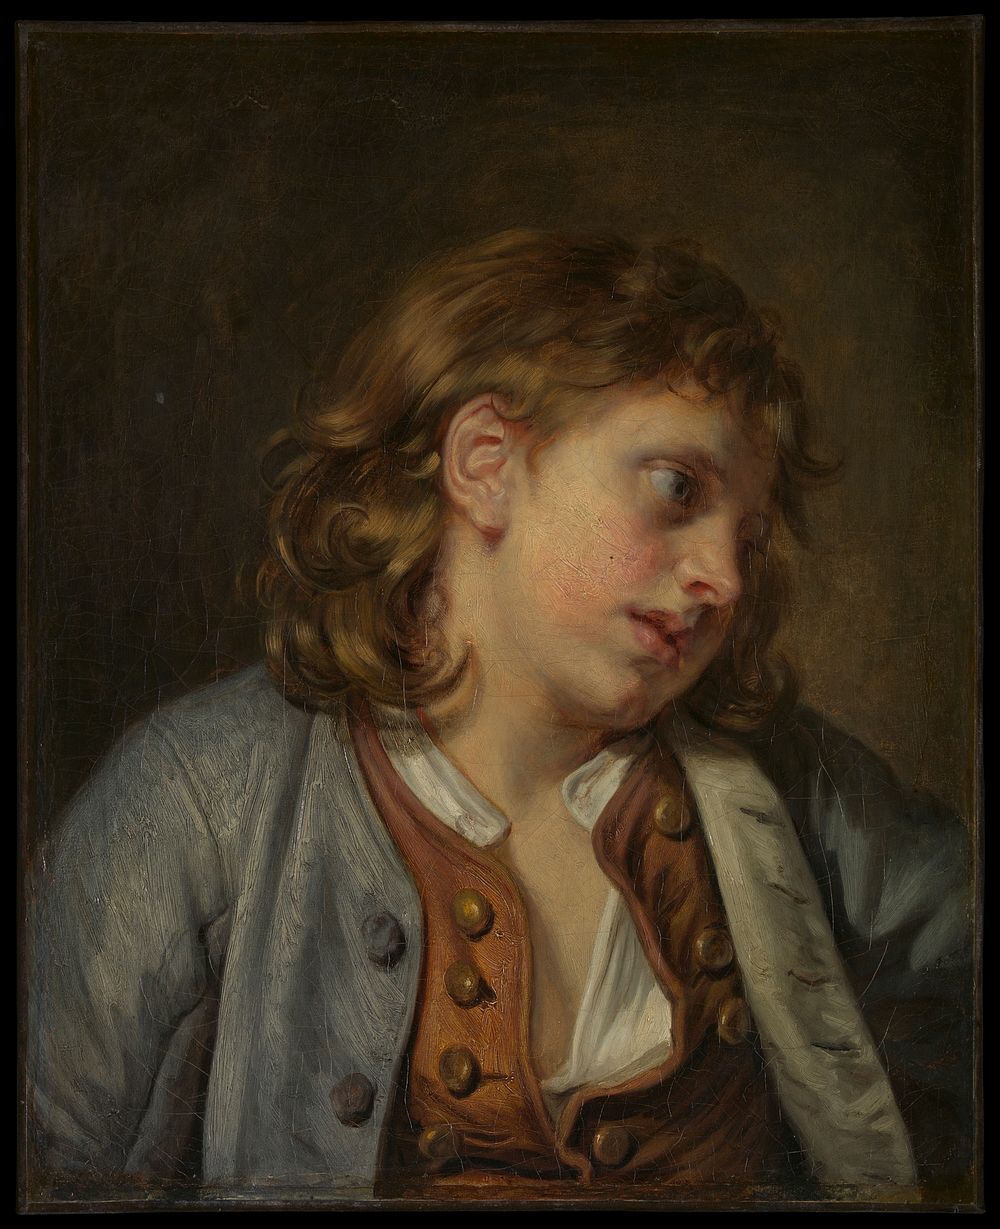 Head of a Young Boy by Jean-Baptiste Greuze